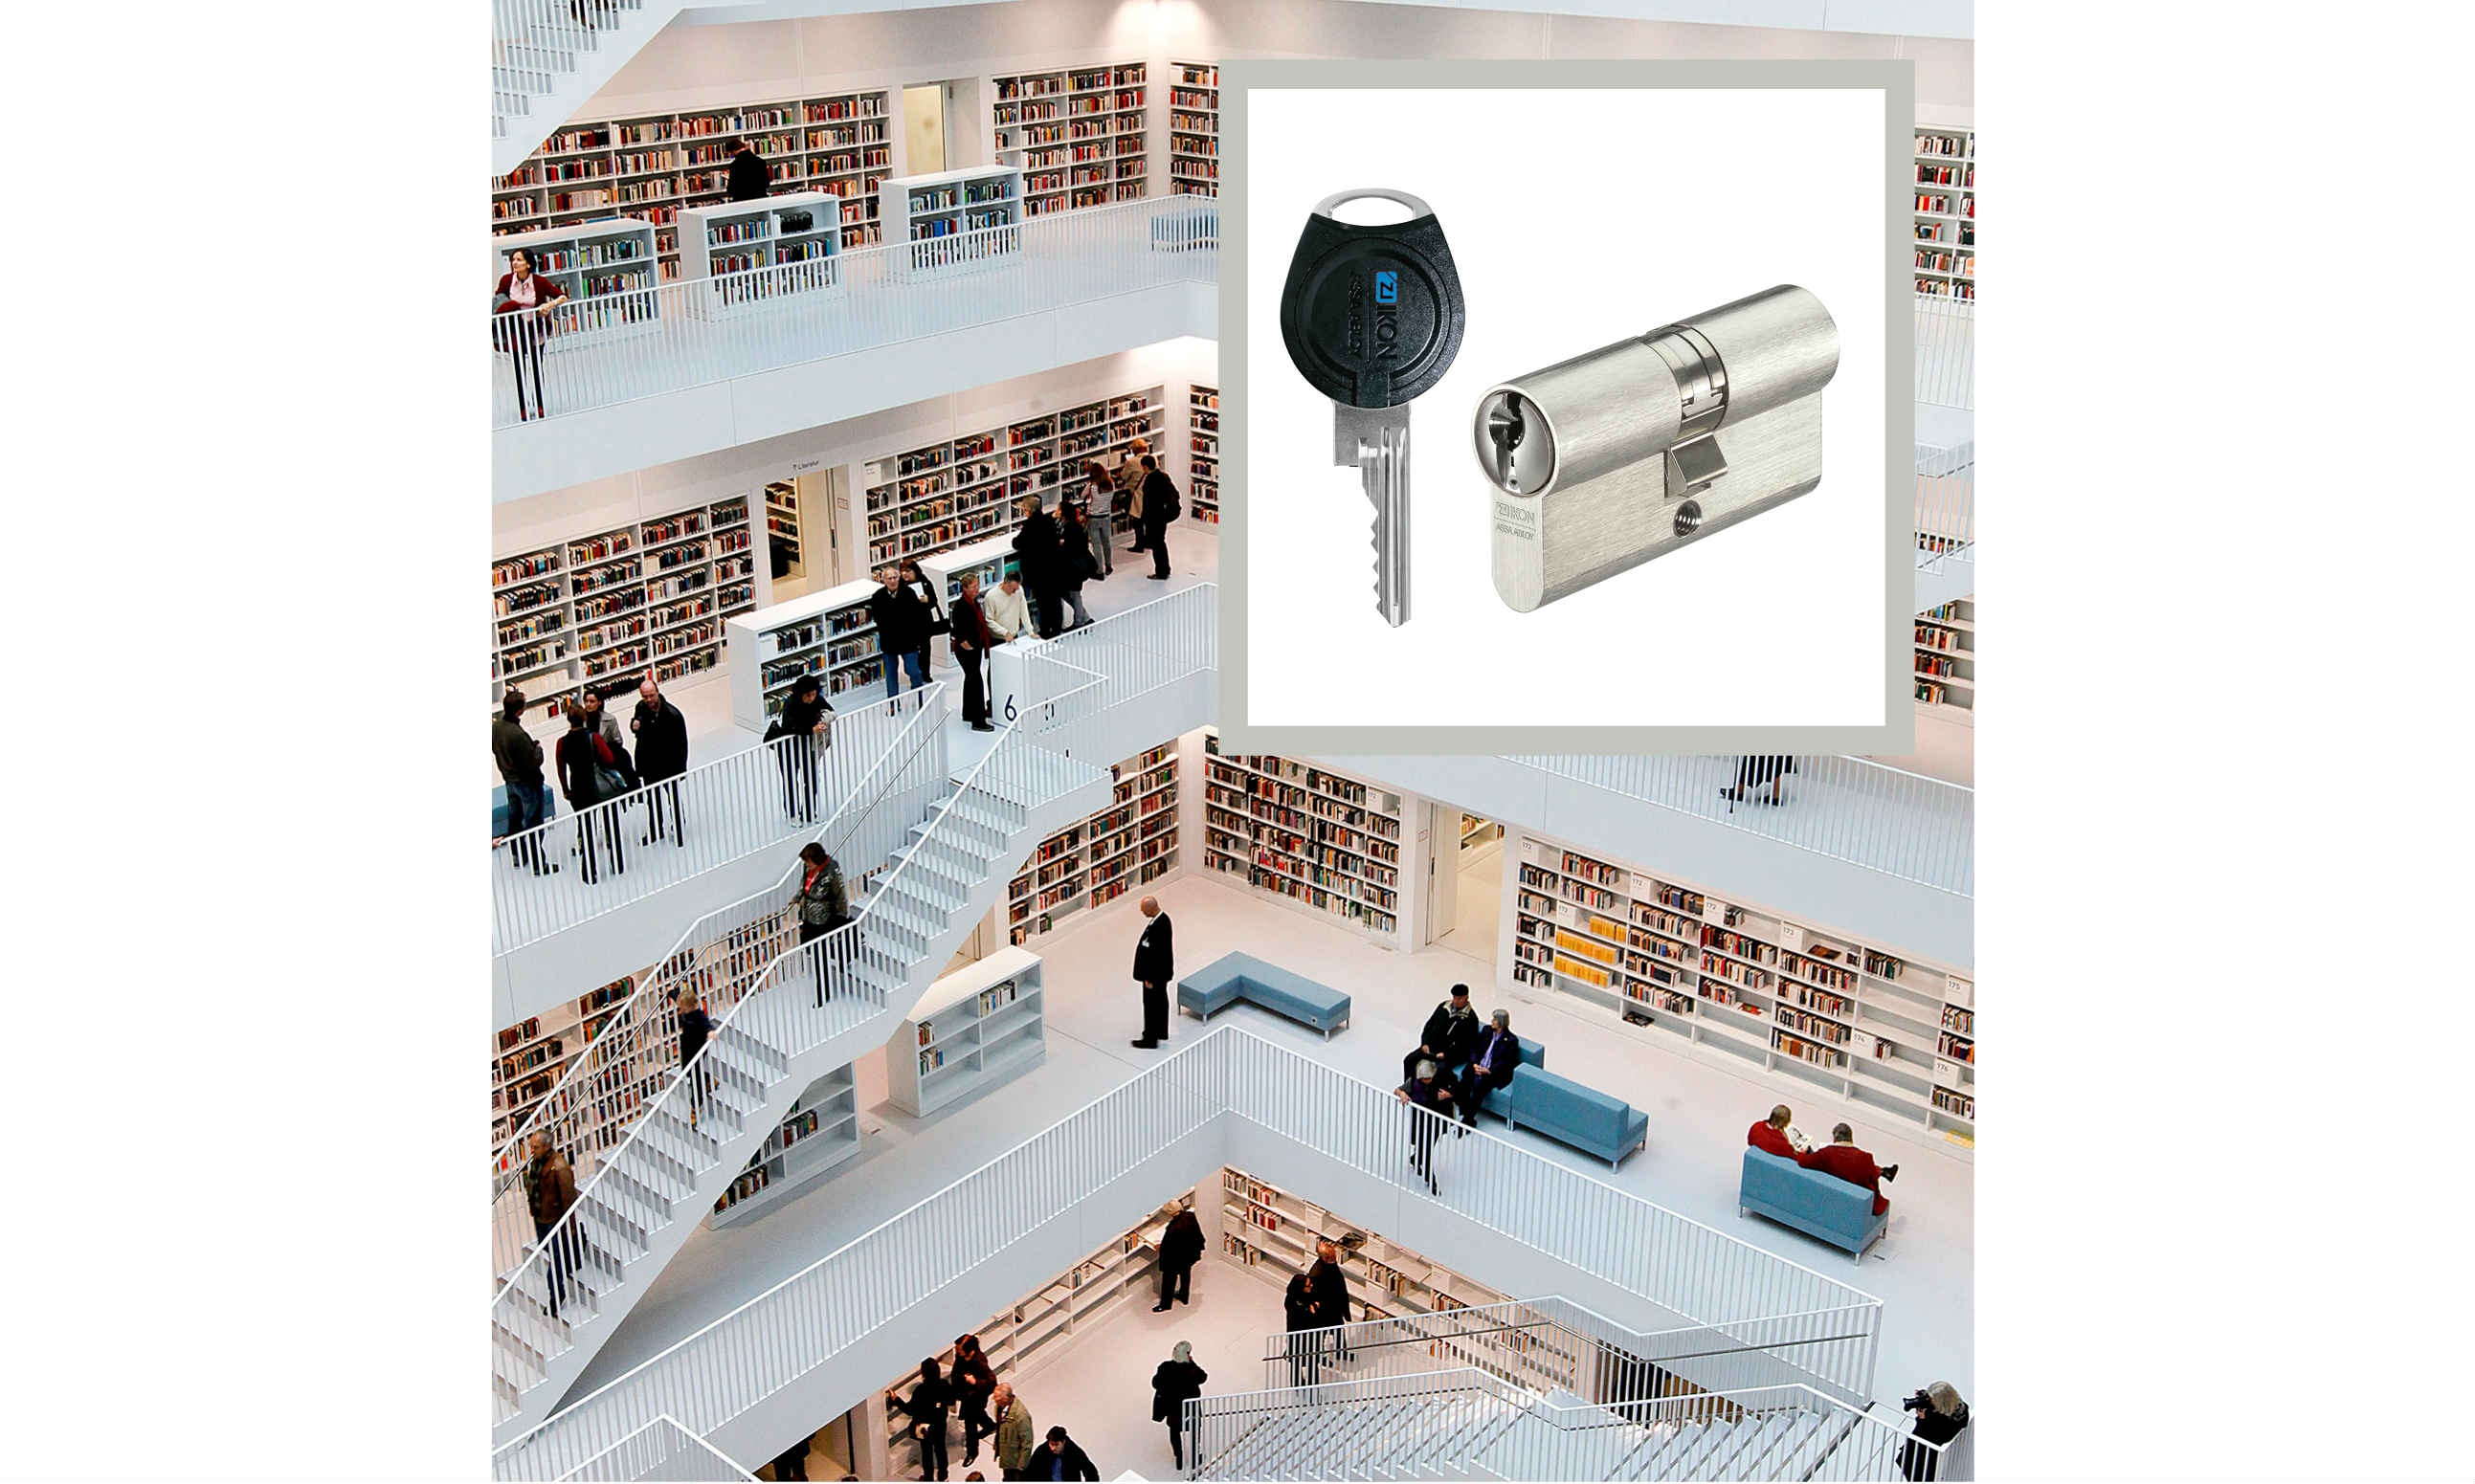 The most important interior areas in the new central library in Stuttgart are managed using the CLIQ® locking system from ASSA ABLOY.